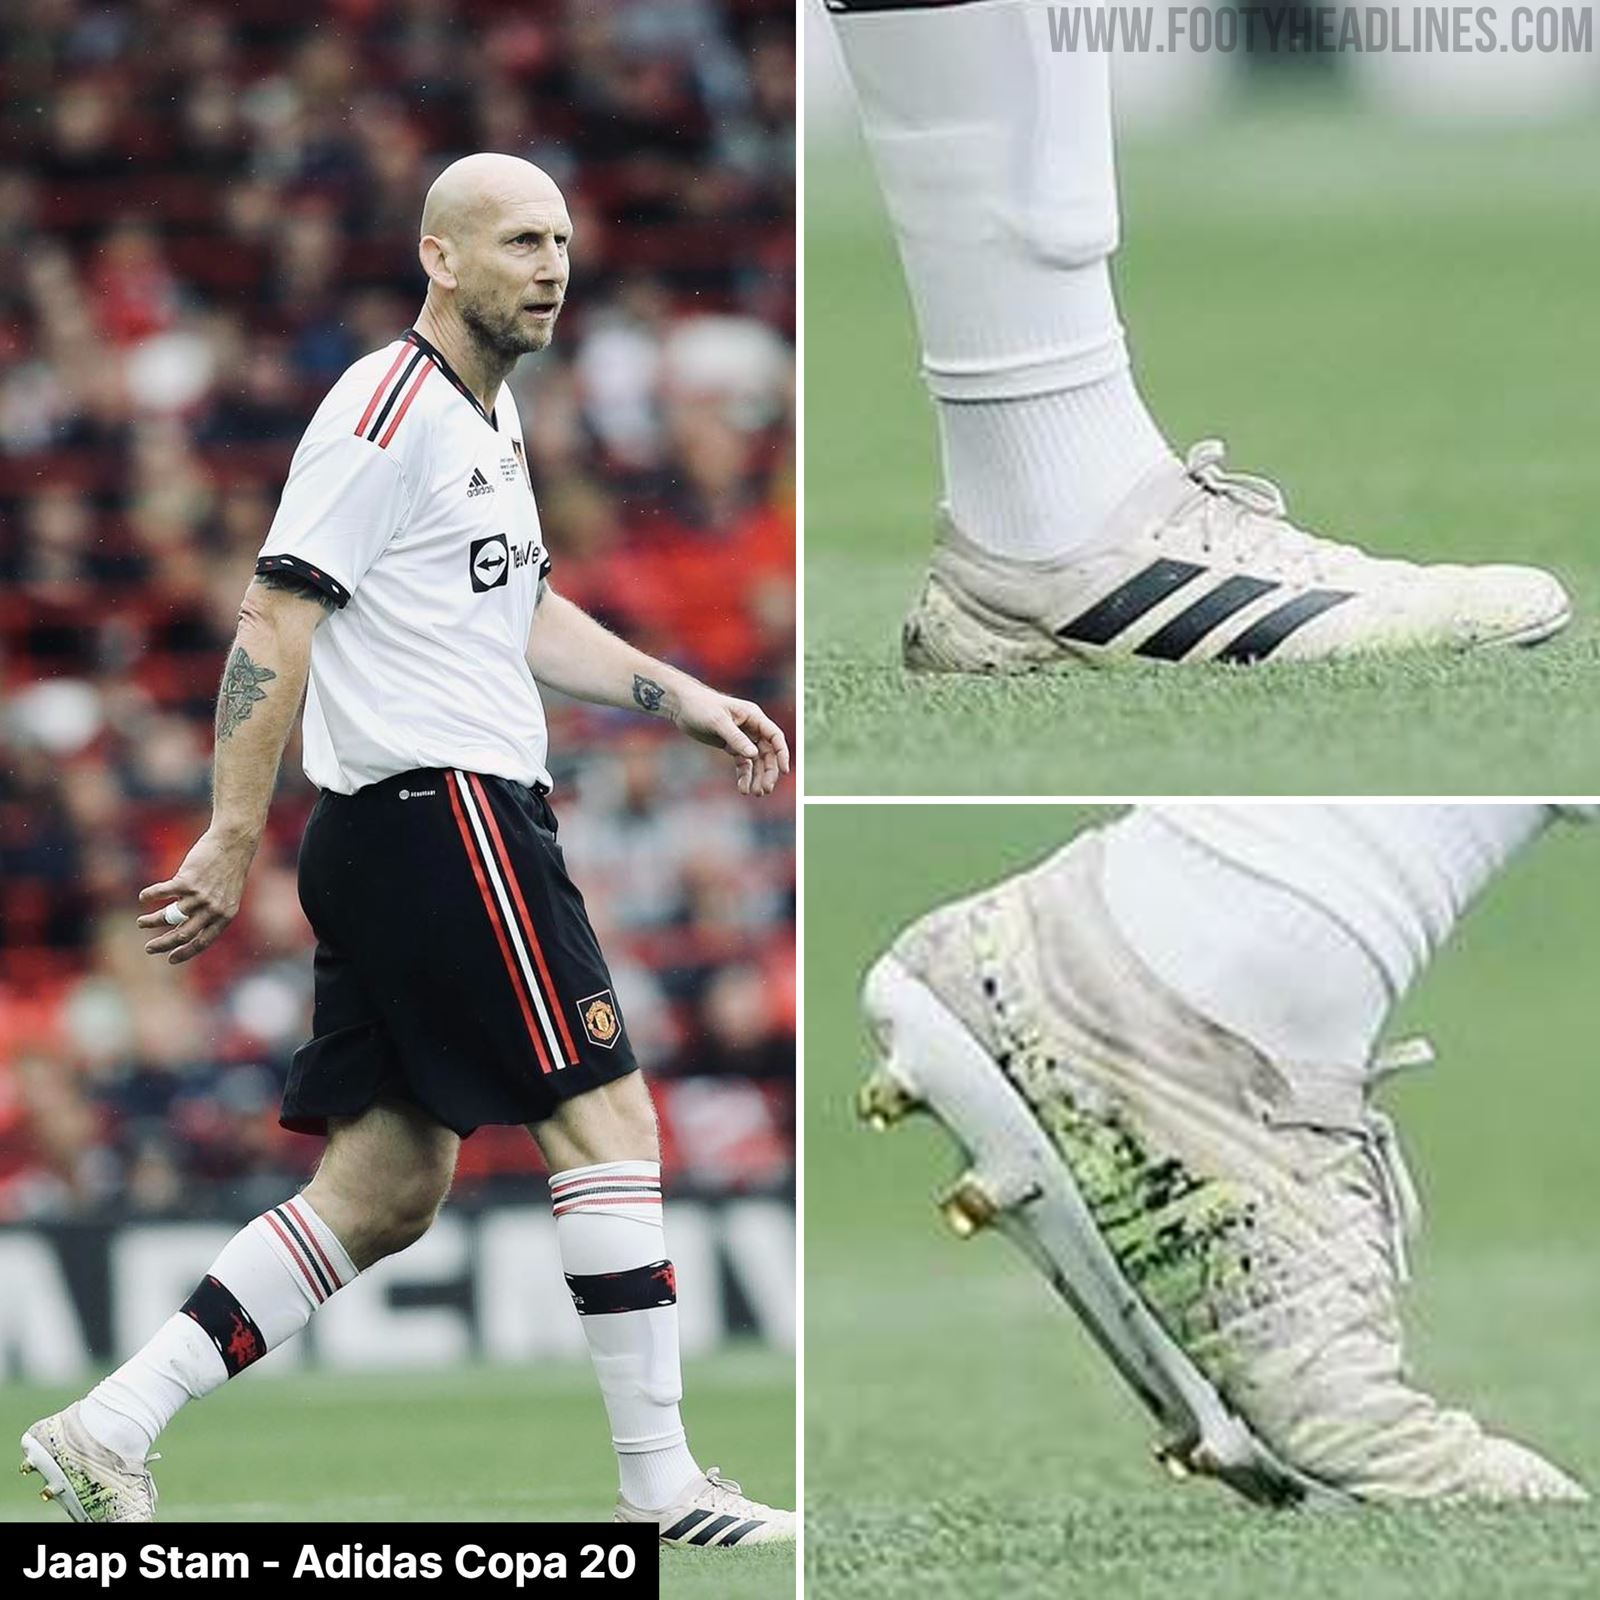 Xabi Alonso Wears Classy Predator Boots - Liverpool vs Manchester United Legends Boots - Footy Headlines